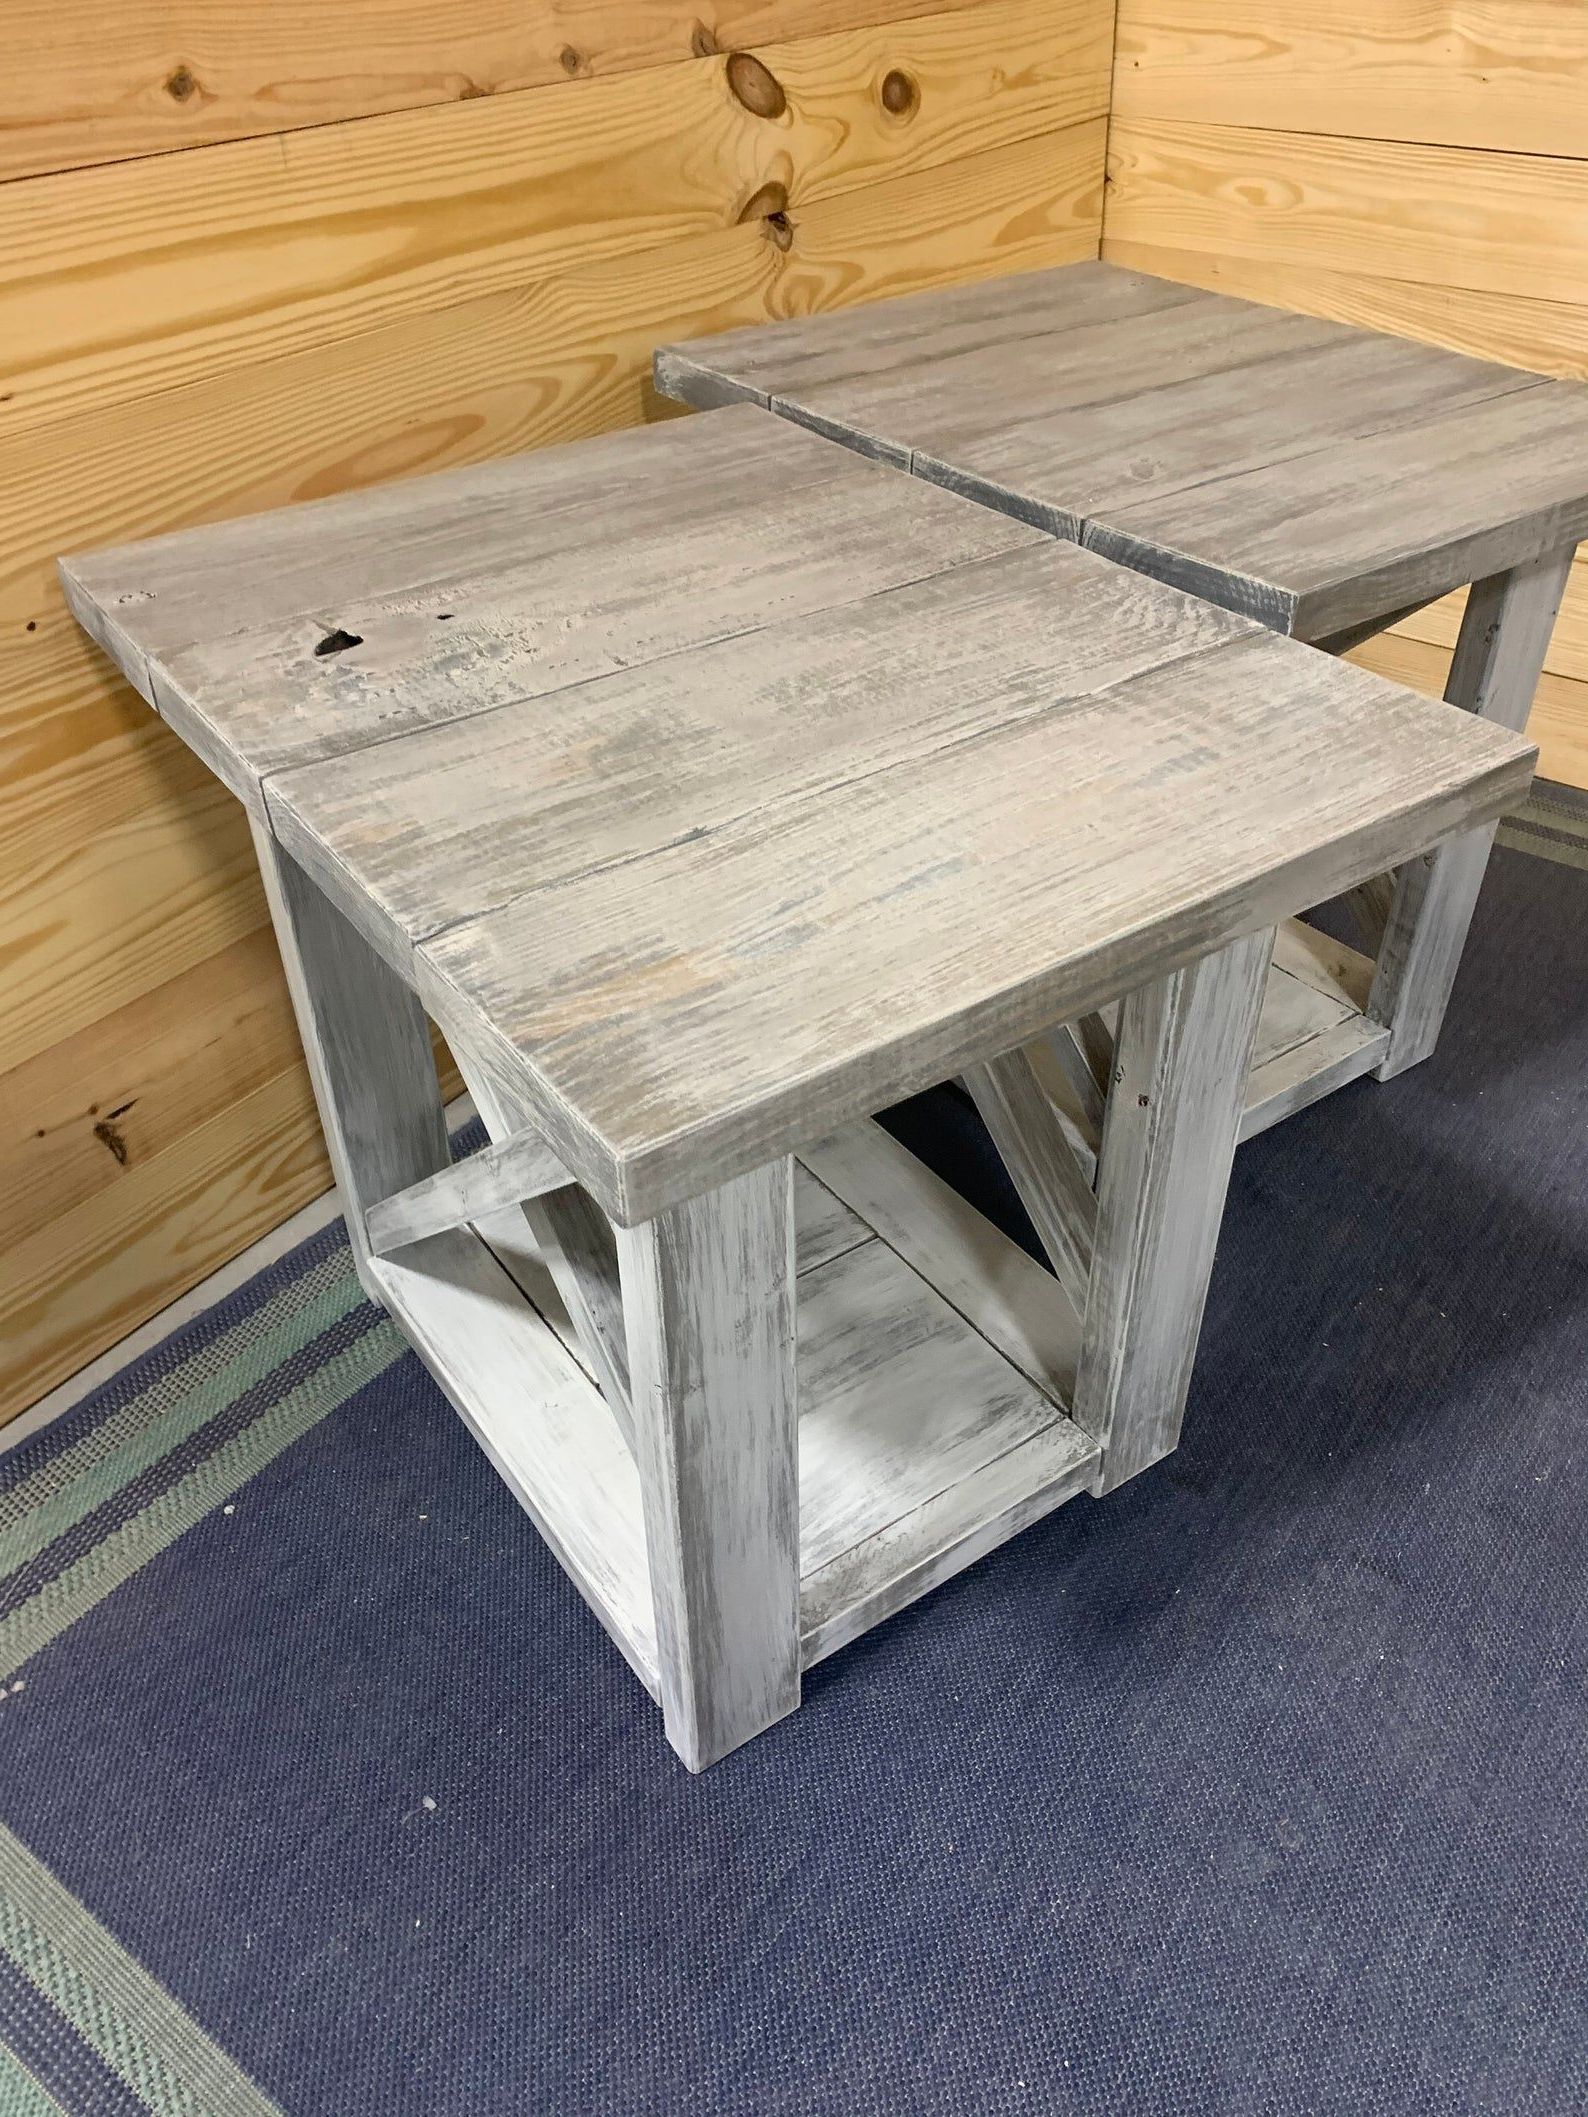 Long Rustic Farmhouse End Tables Gray White Wash Top With With Regard To Most Popular Oceanside White Washed Coffee Tables (Gallery 10 of 20)